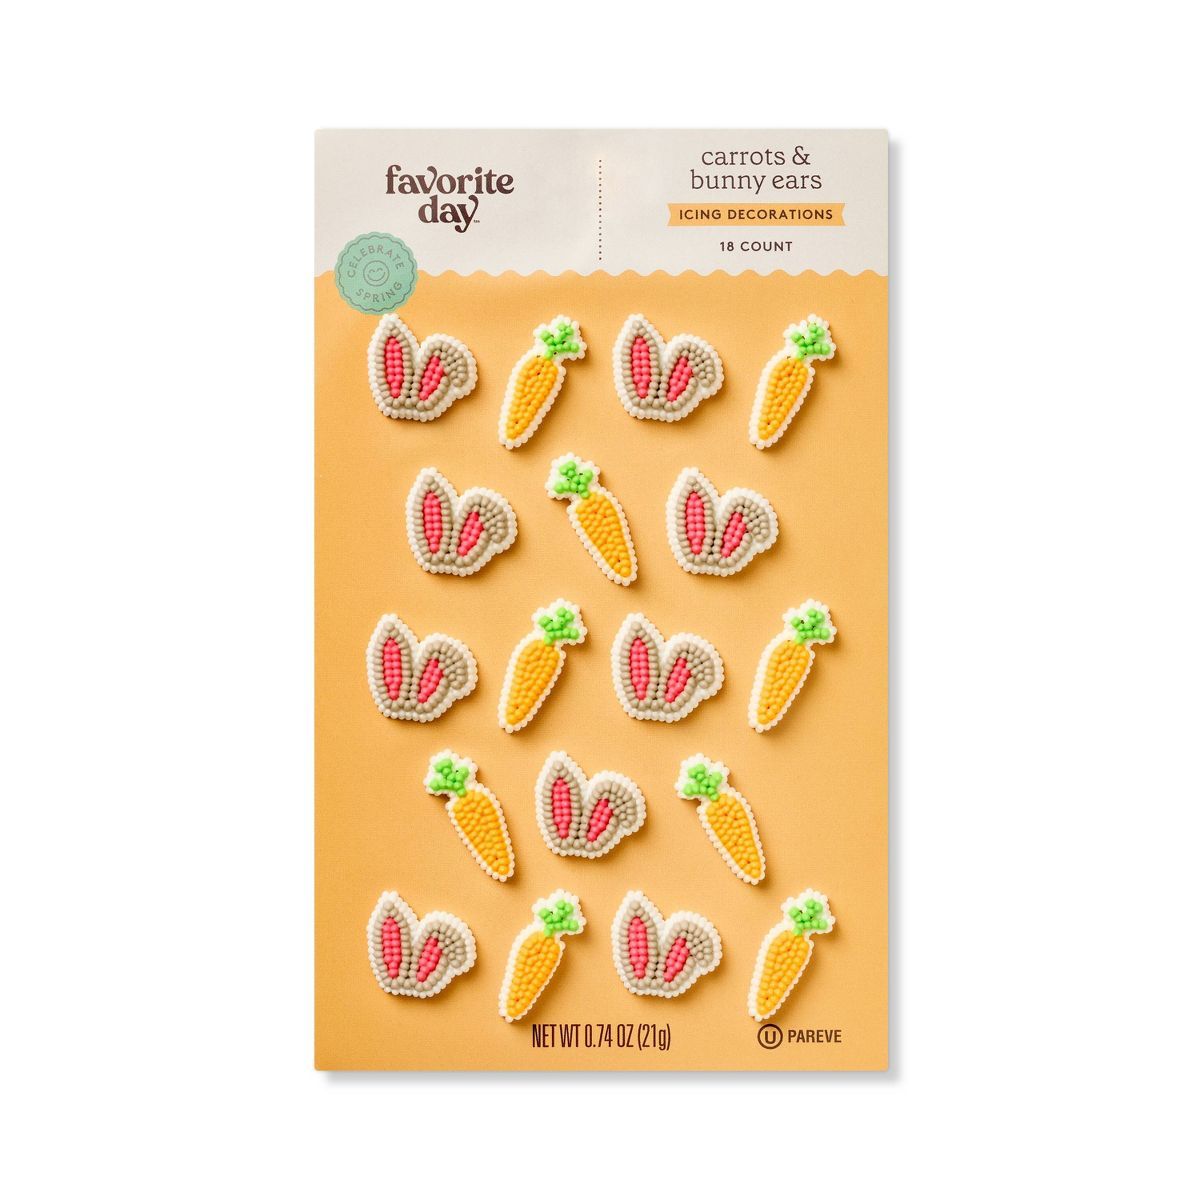 Spring Bunny & Carrots Candy Card - 18ct - Favorite Day™ | Target